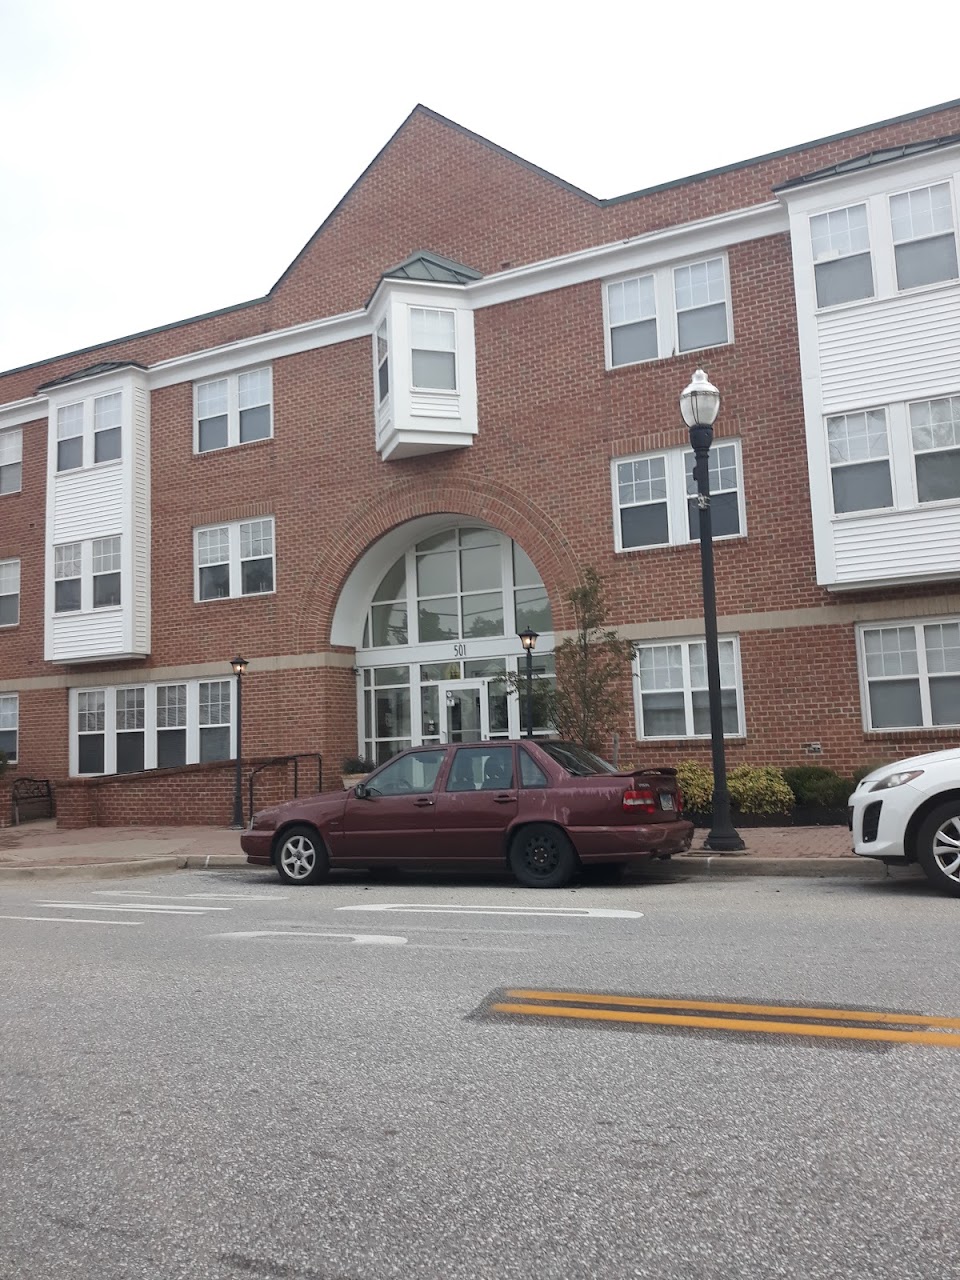 Photo of SELBORNE HOUSE (LAUREL). Affordable housing located at 501 MAIN ST LAUREL, MD 20707